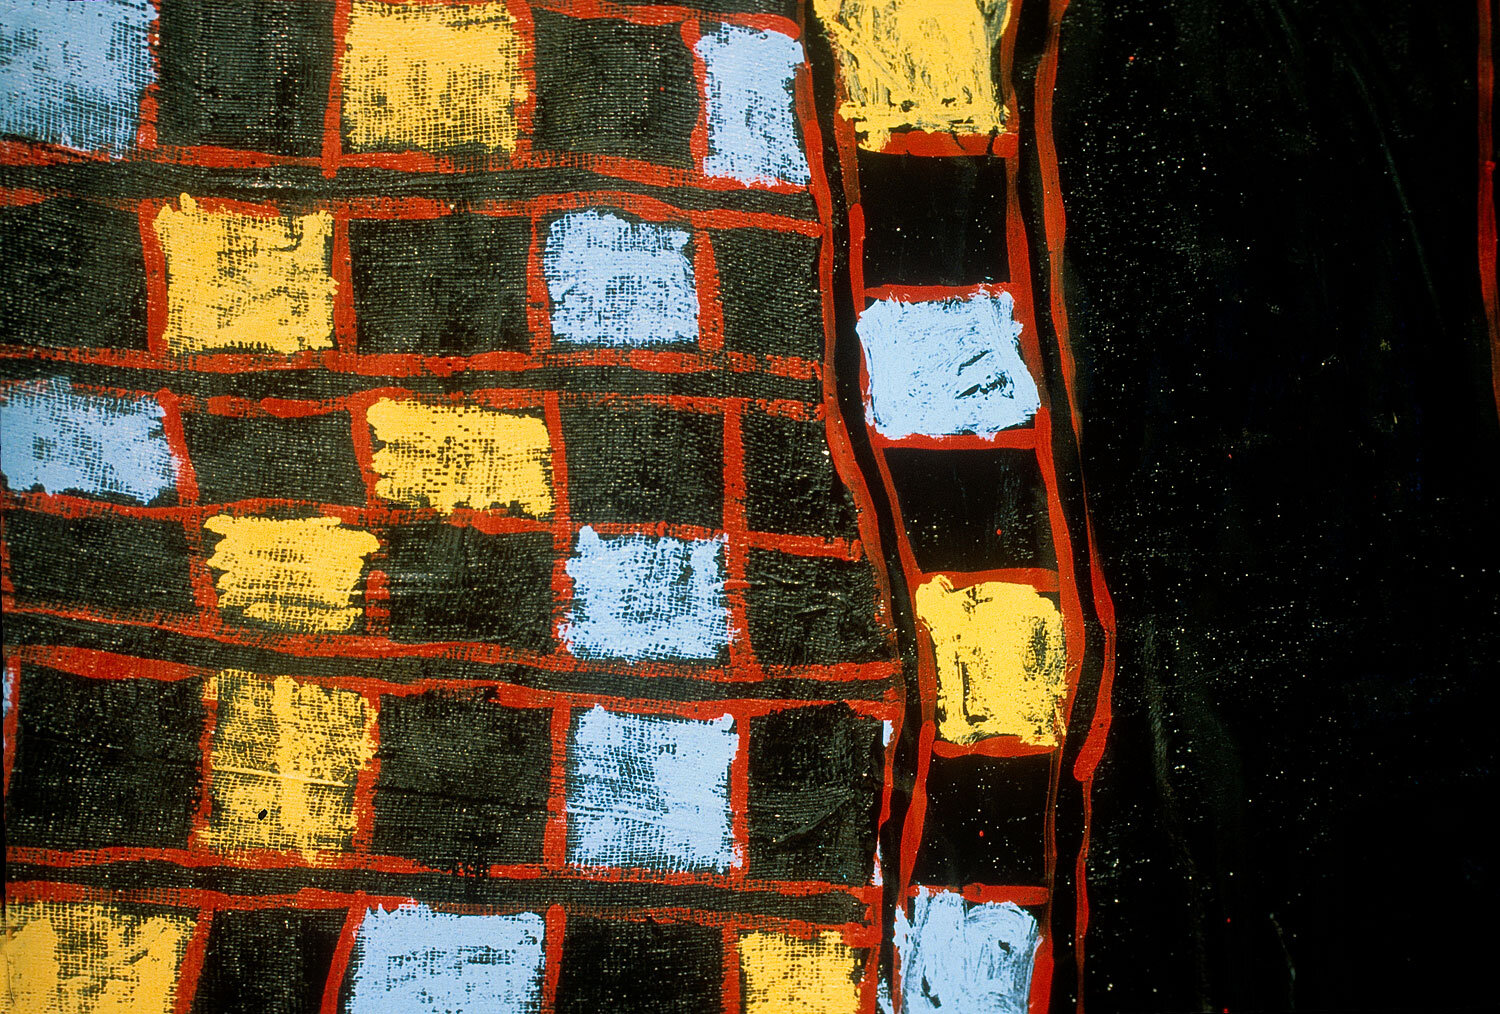   Checkered Madness  (detail), 1982, cheesecloth, latex enamel, gesso, 67 x 85 inches 